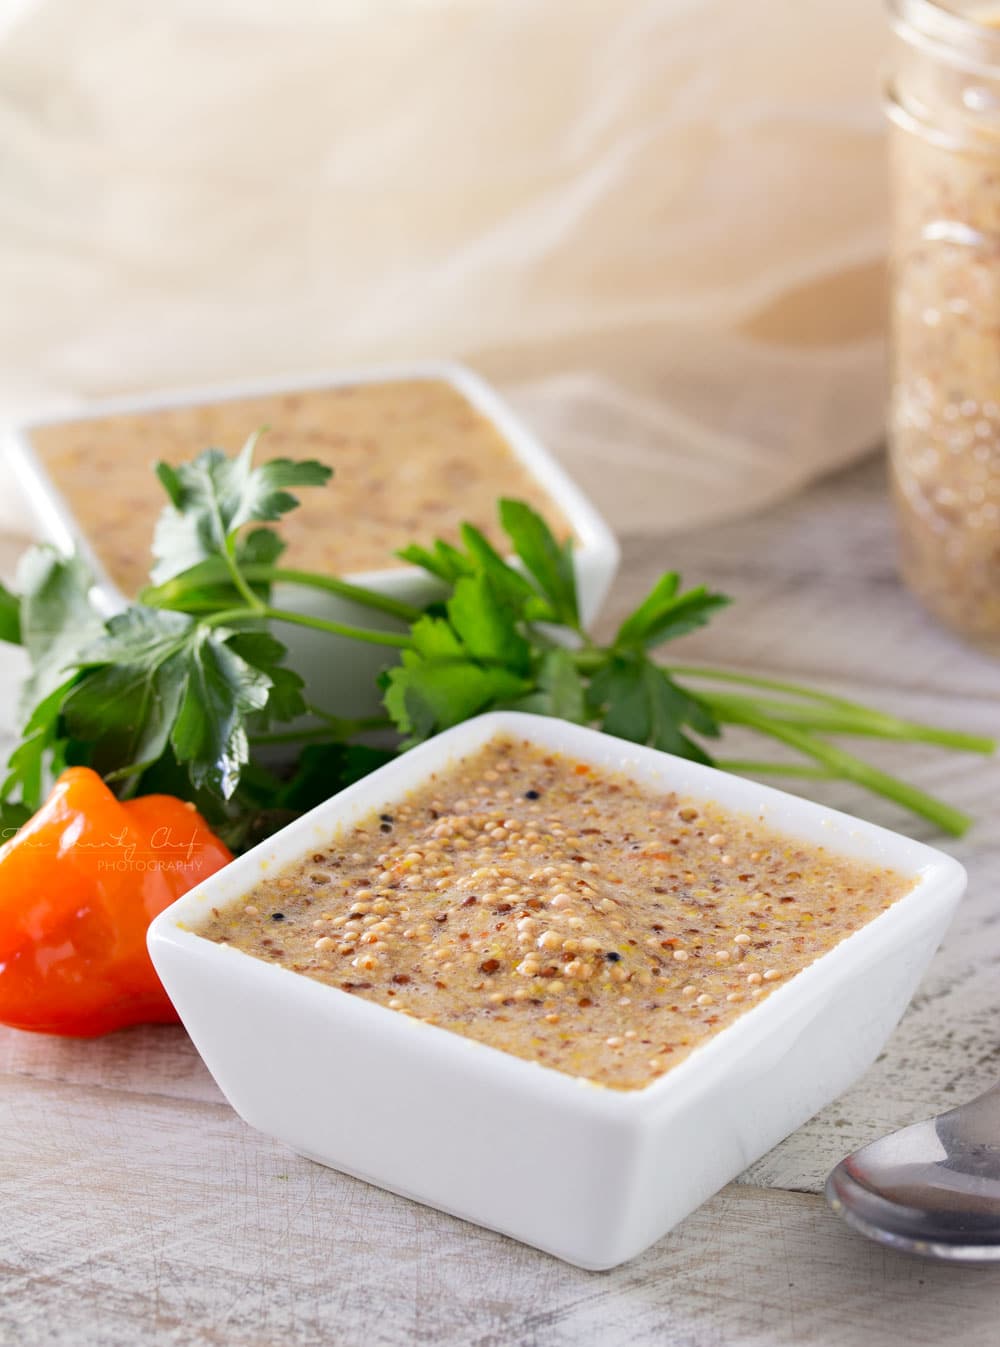 Habanero Beer Mustard | This easy homemade beer mustard gets a spicy kick from fresh habanero peppers. Once you try homemade mustard, you won't want to buy it any more! | http://thechunkychef.com